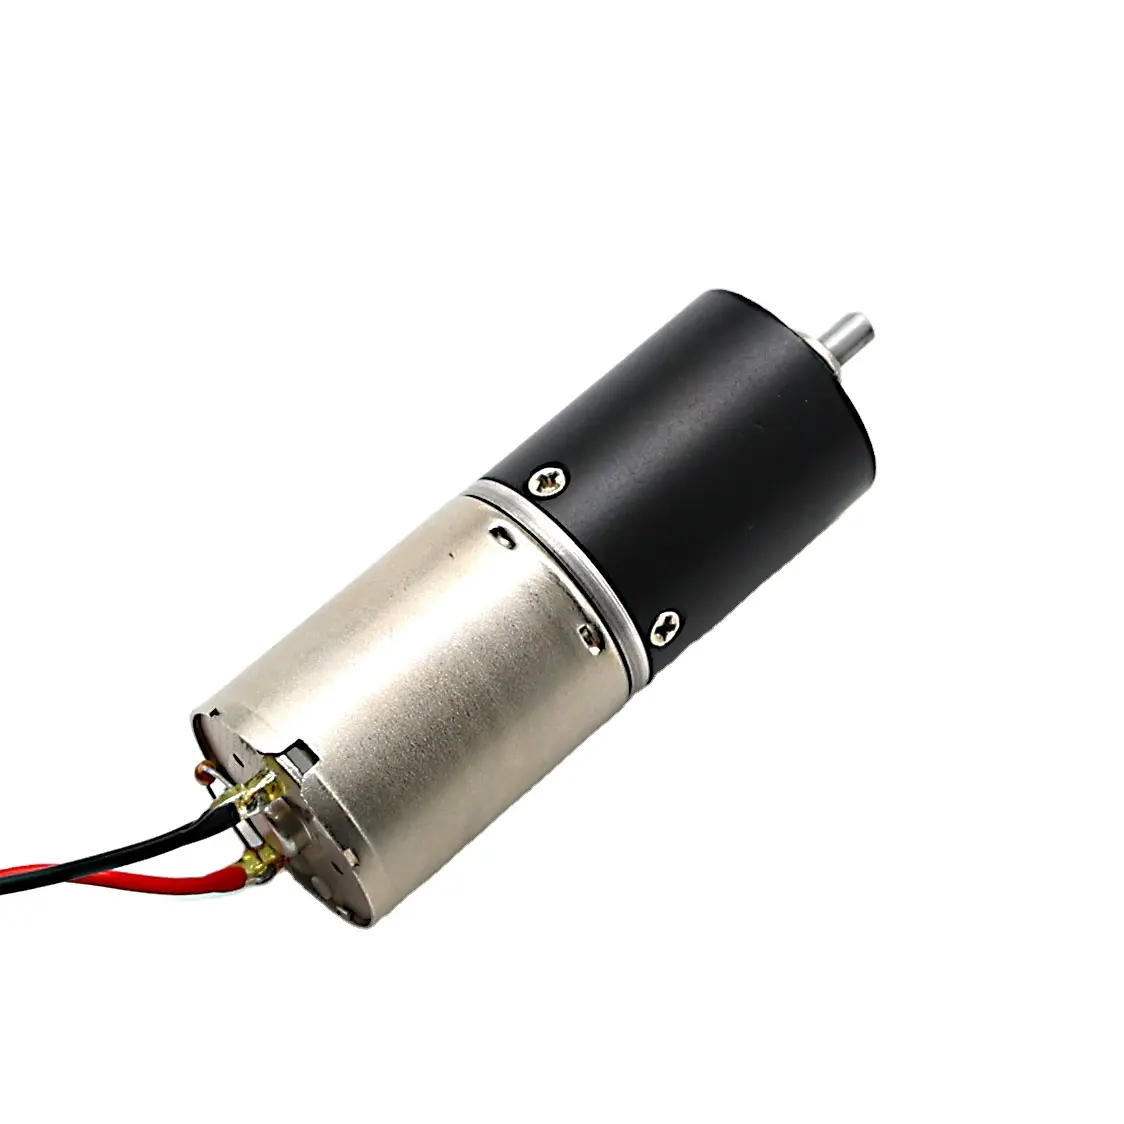 rf-370 dc motor 24mm gear motor with planetary gearbox 12 volt dc motor